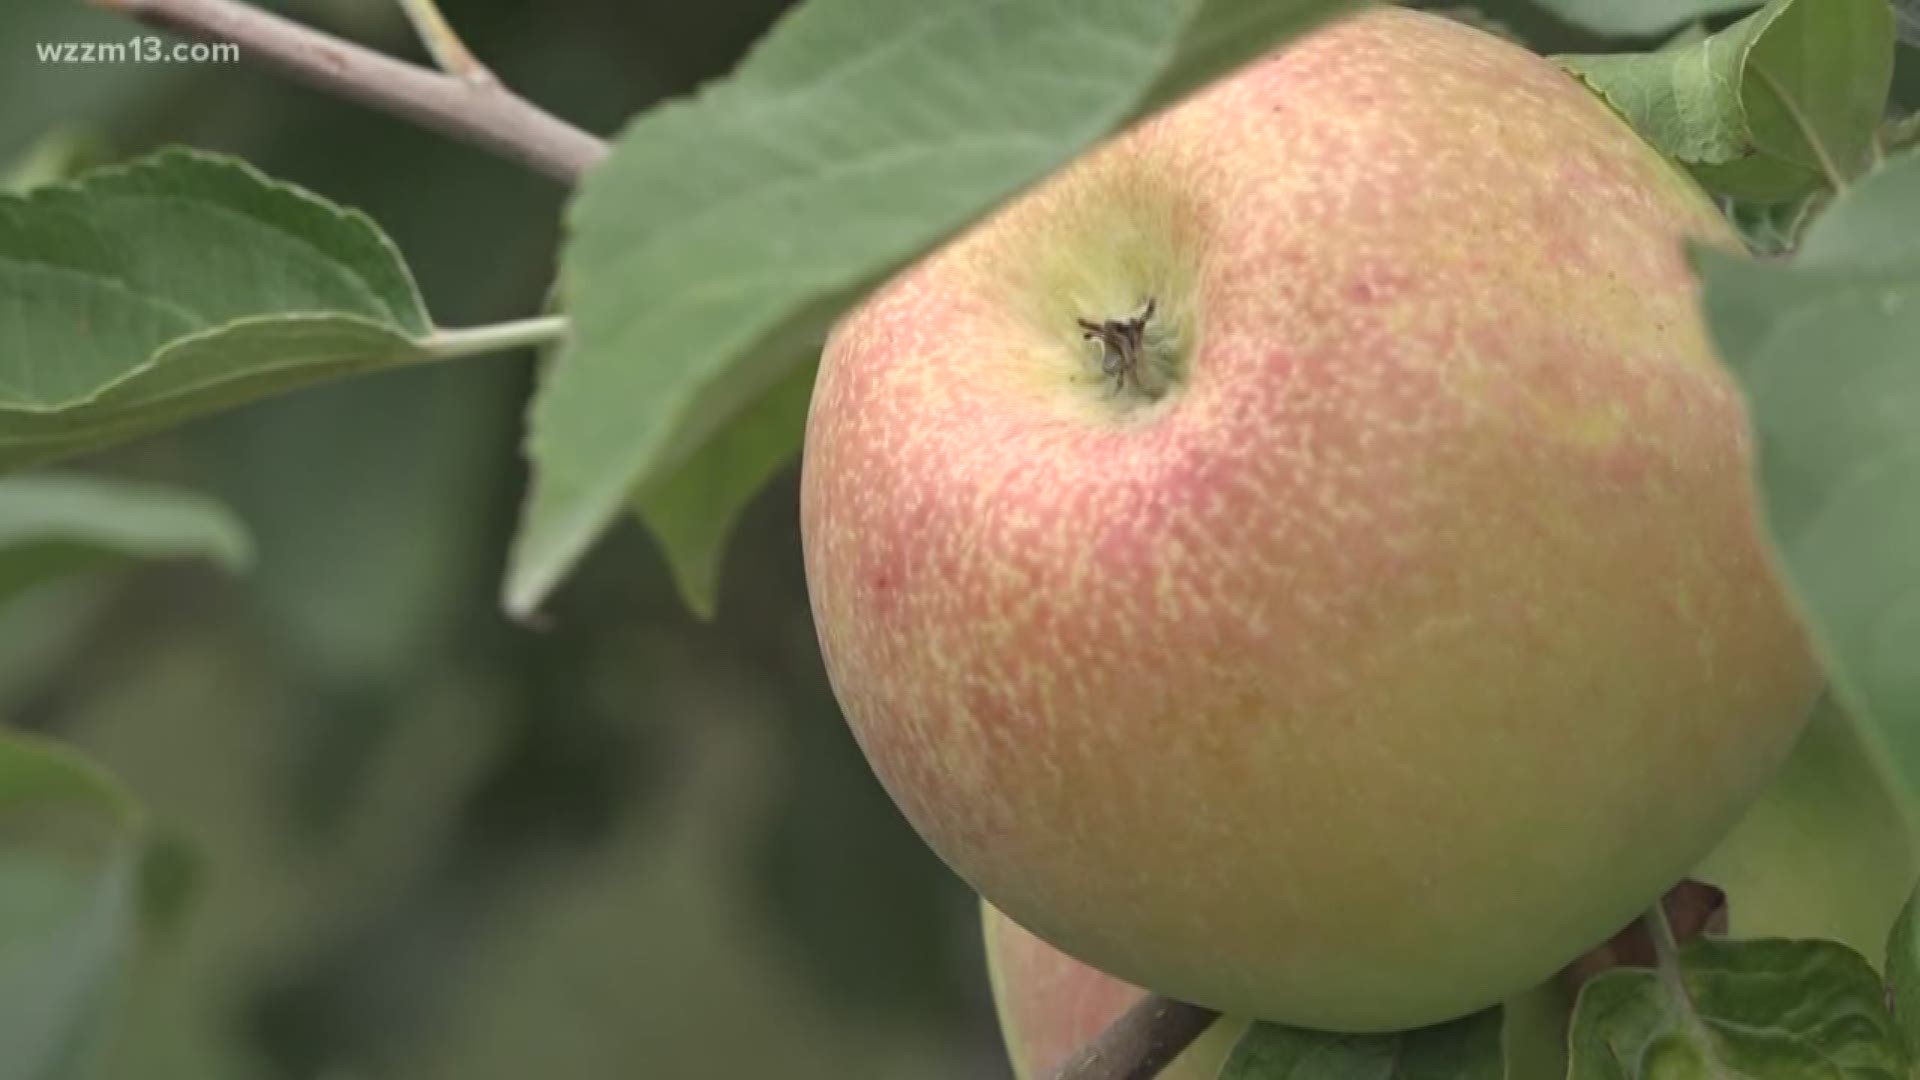 Previewing the fall apple crop